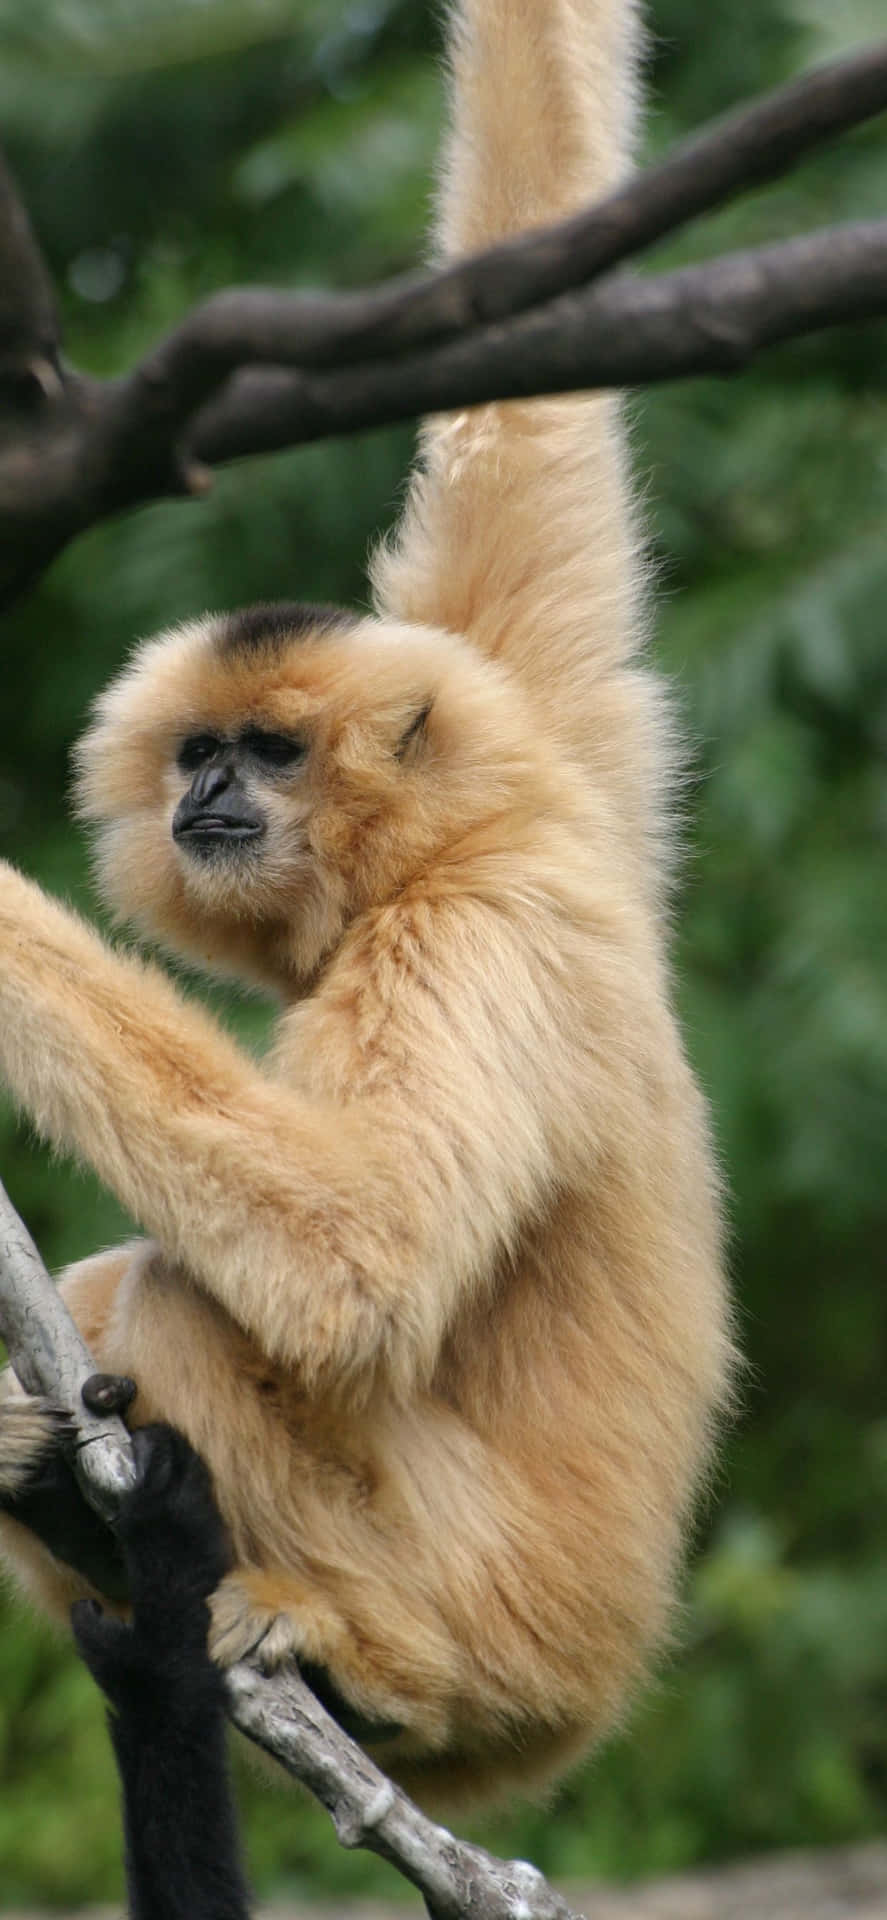 A wacky combination of an iPhone Xs Max with an adorable gibbon